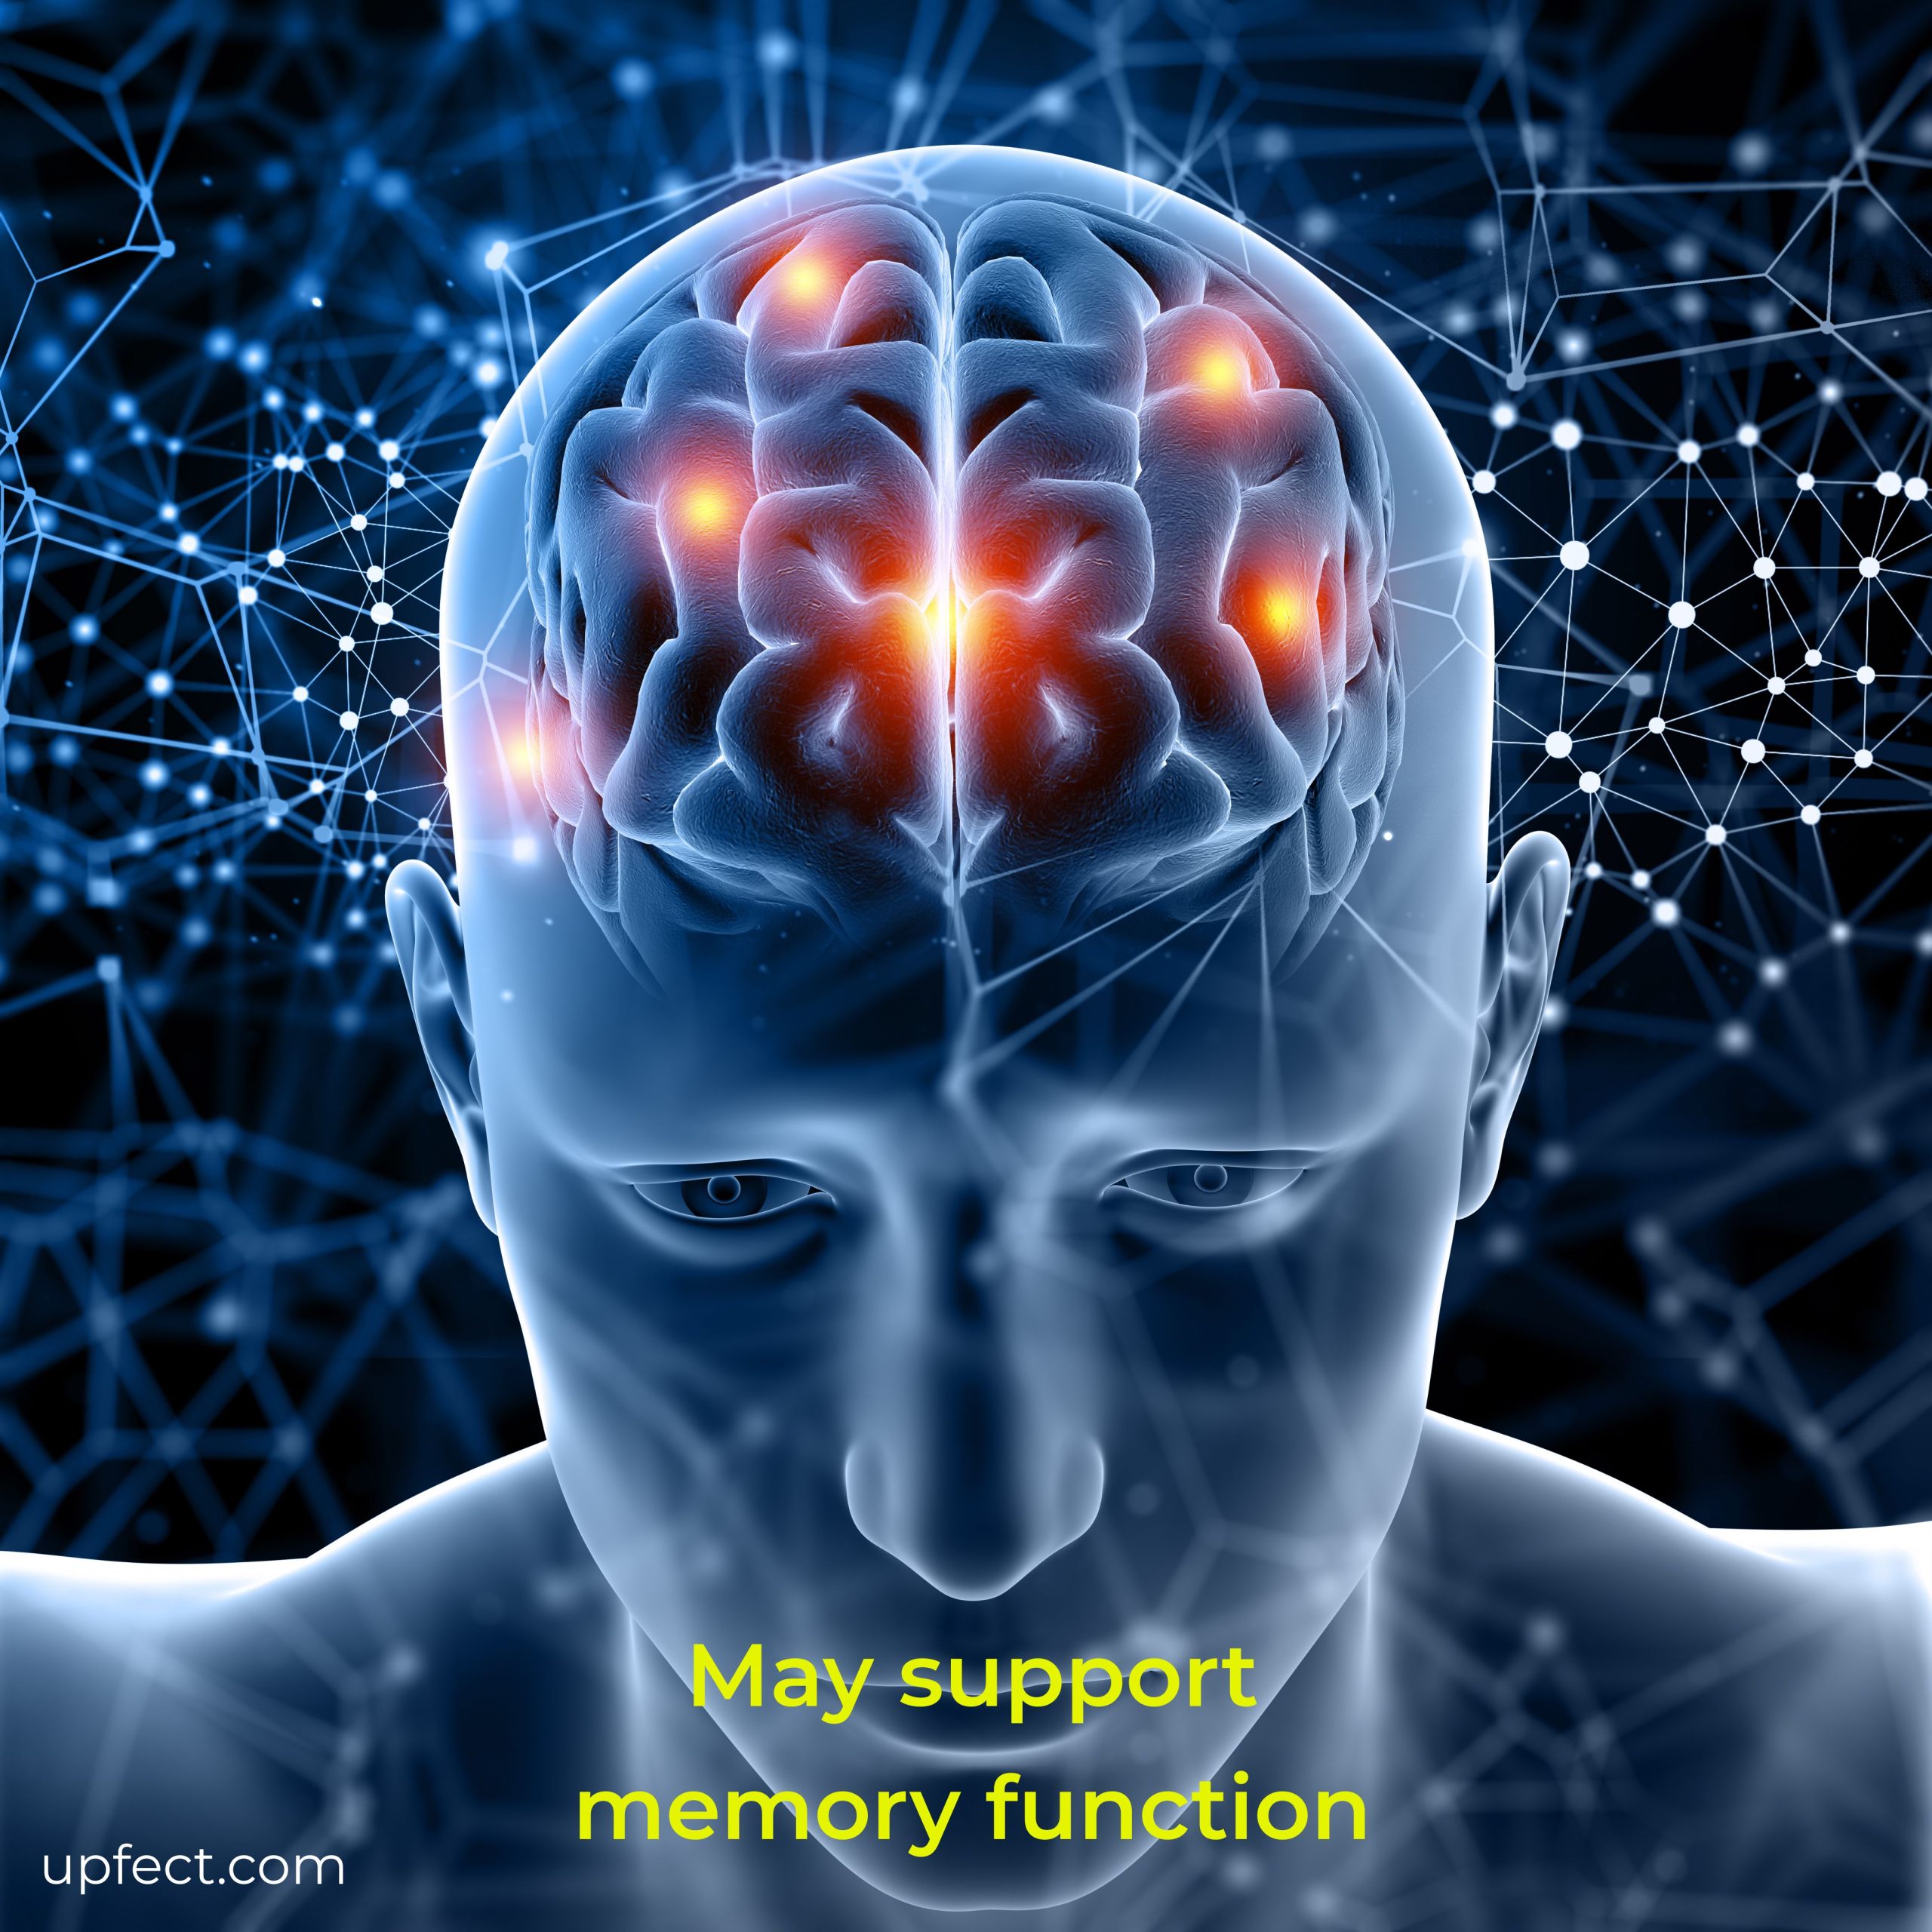 May support memory function